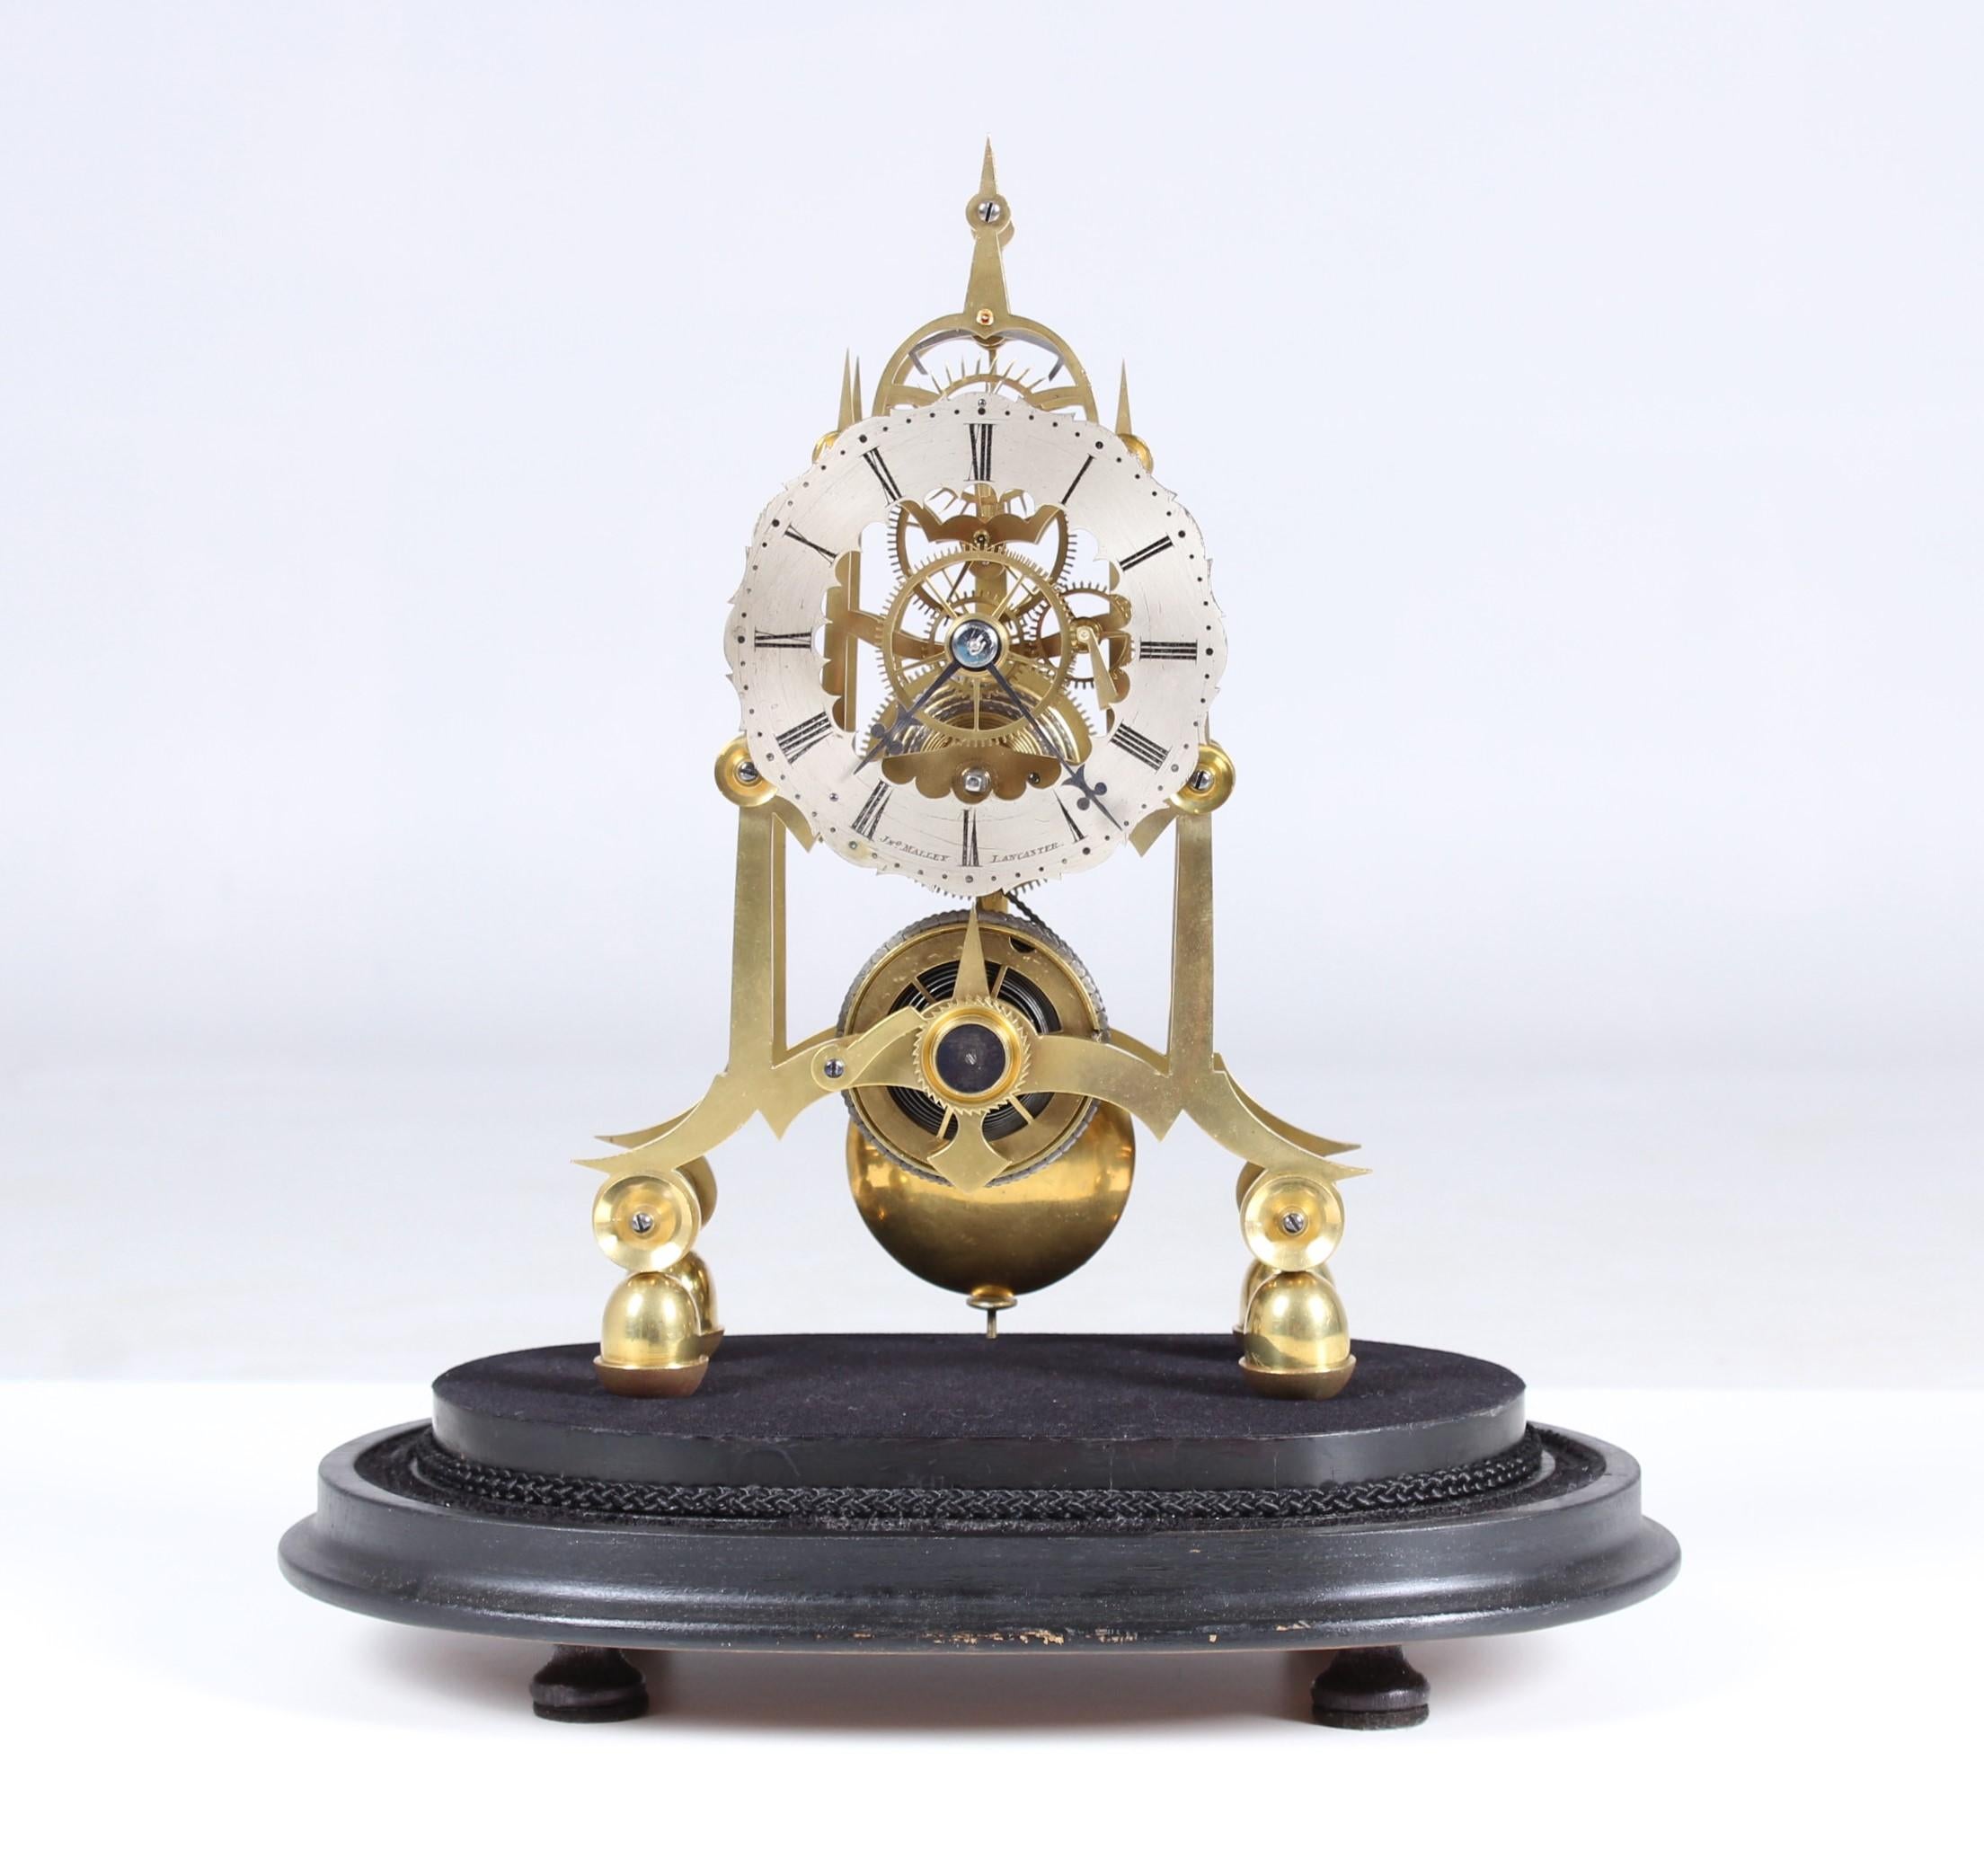 Antique skeleton clock

England
Brass, wood, glass,
Middle 19th century

Dimensions: height with glass dome ca 30 cm

Description:
Ebonized wooden base mounted clock with eight-day movement with anchor escapement.
Winding by drum, fusee